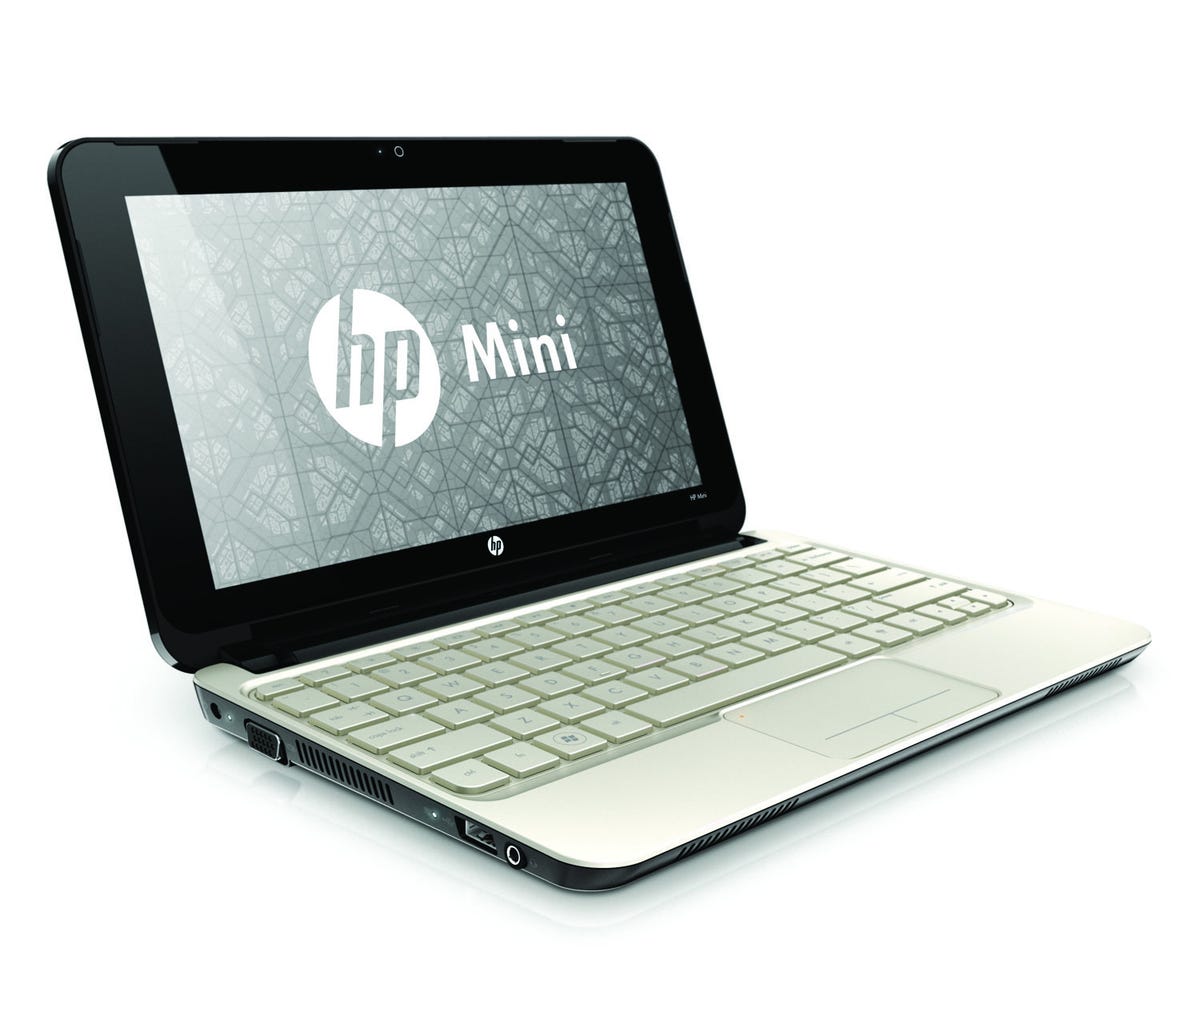 HP_Mini_210,_crystal_white,_front_right.jpg